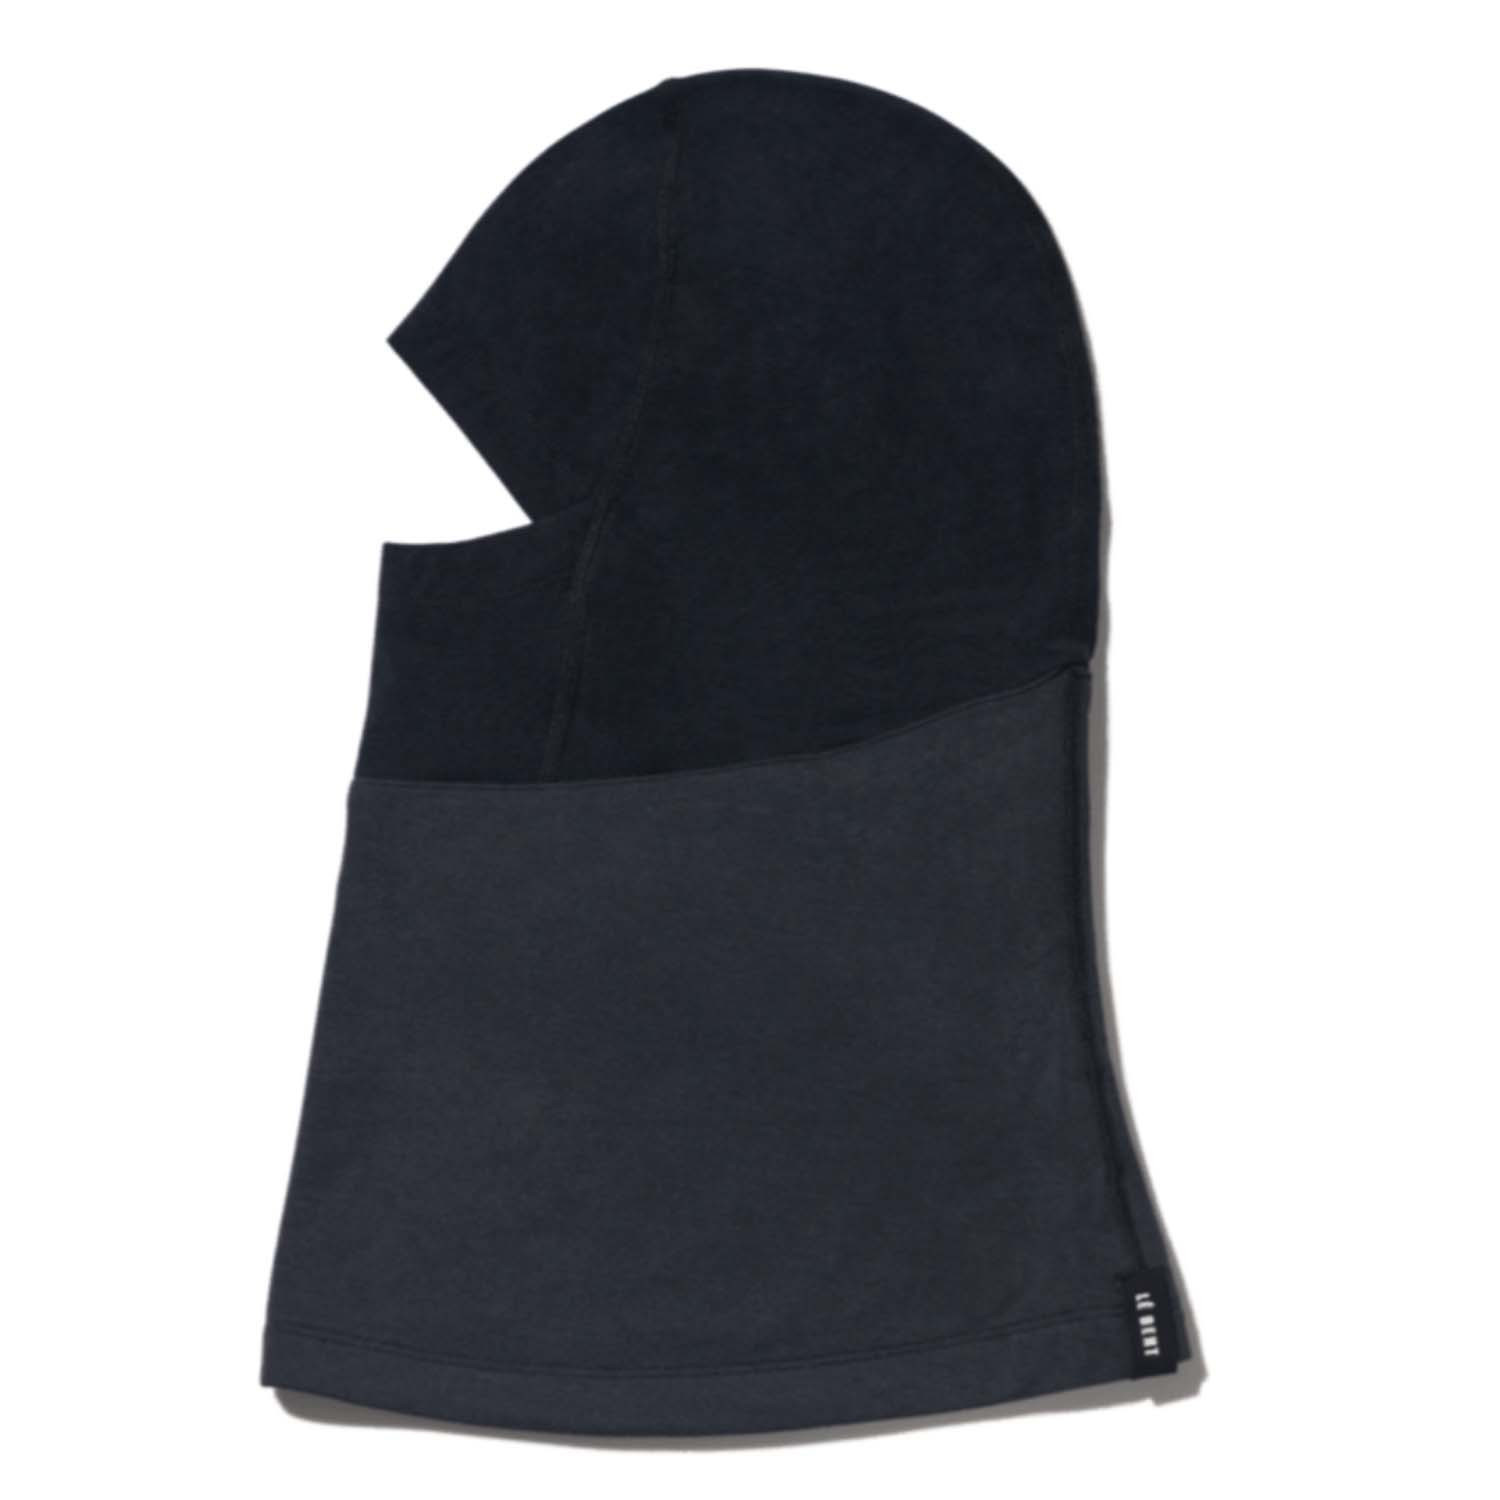 Le Bent Double Up Midweight Balaclava